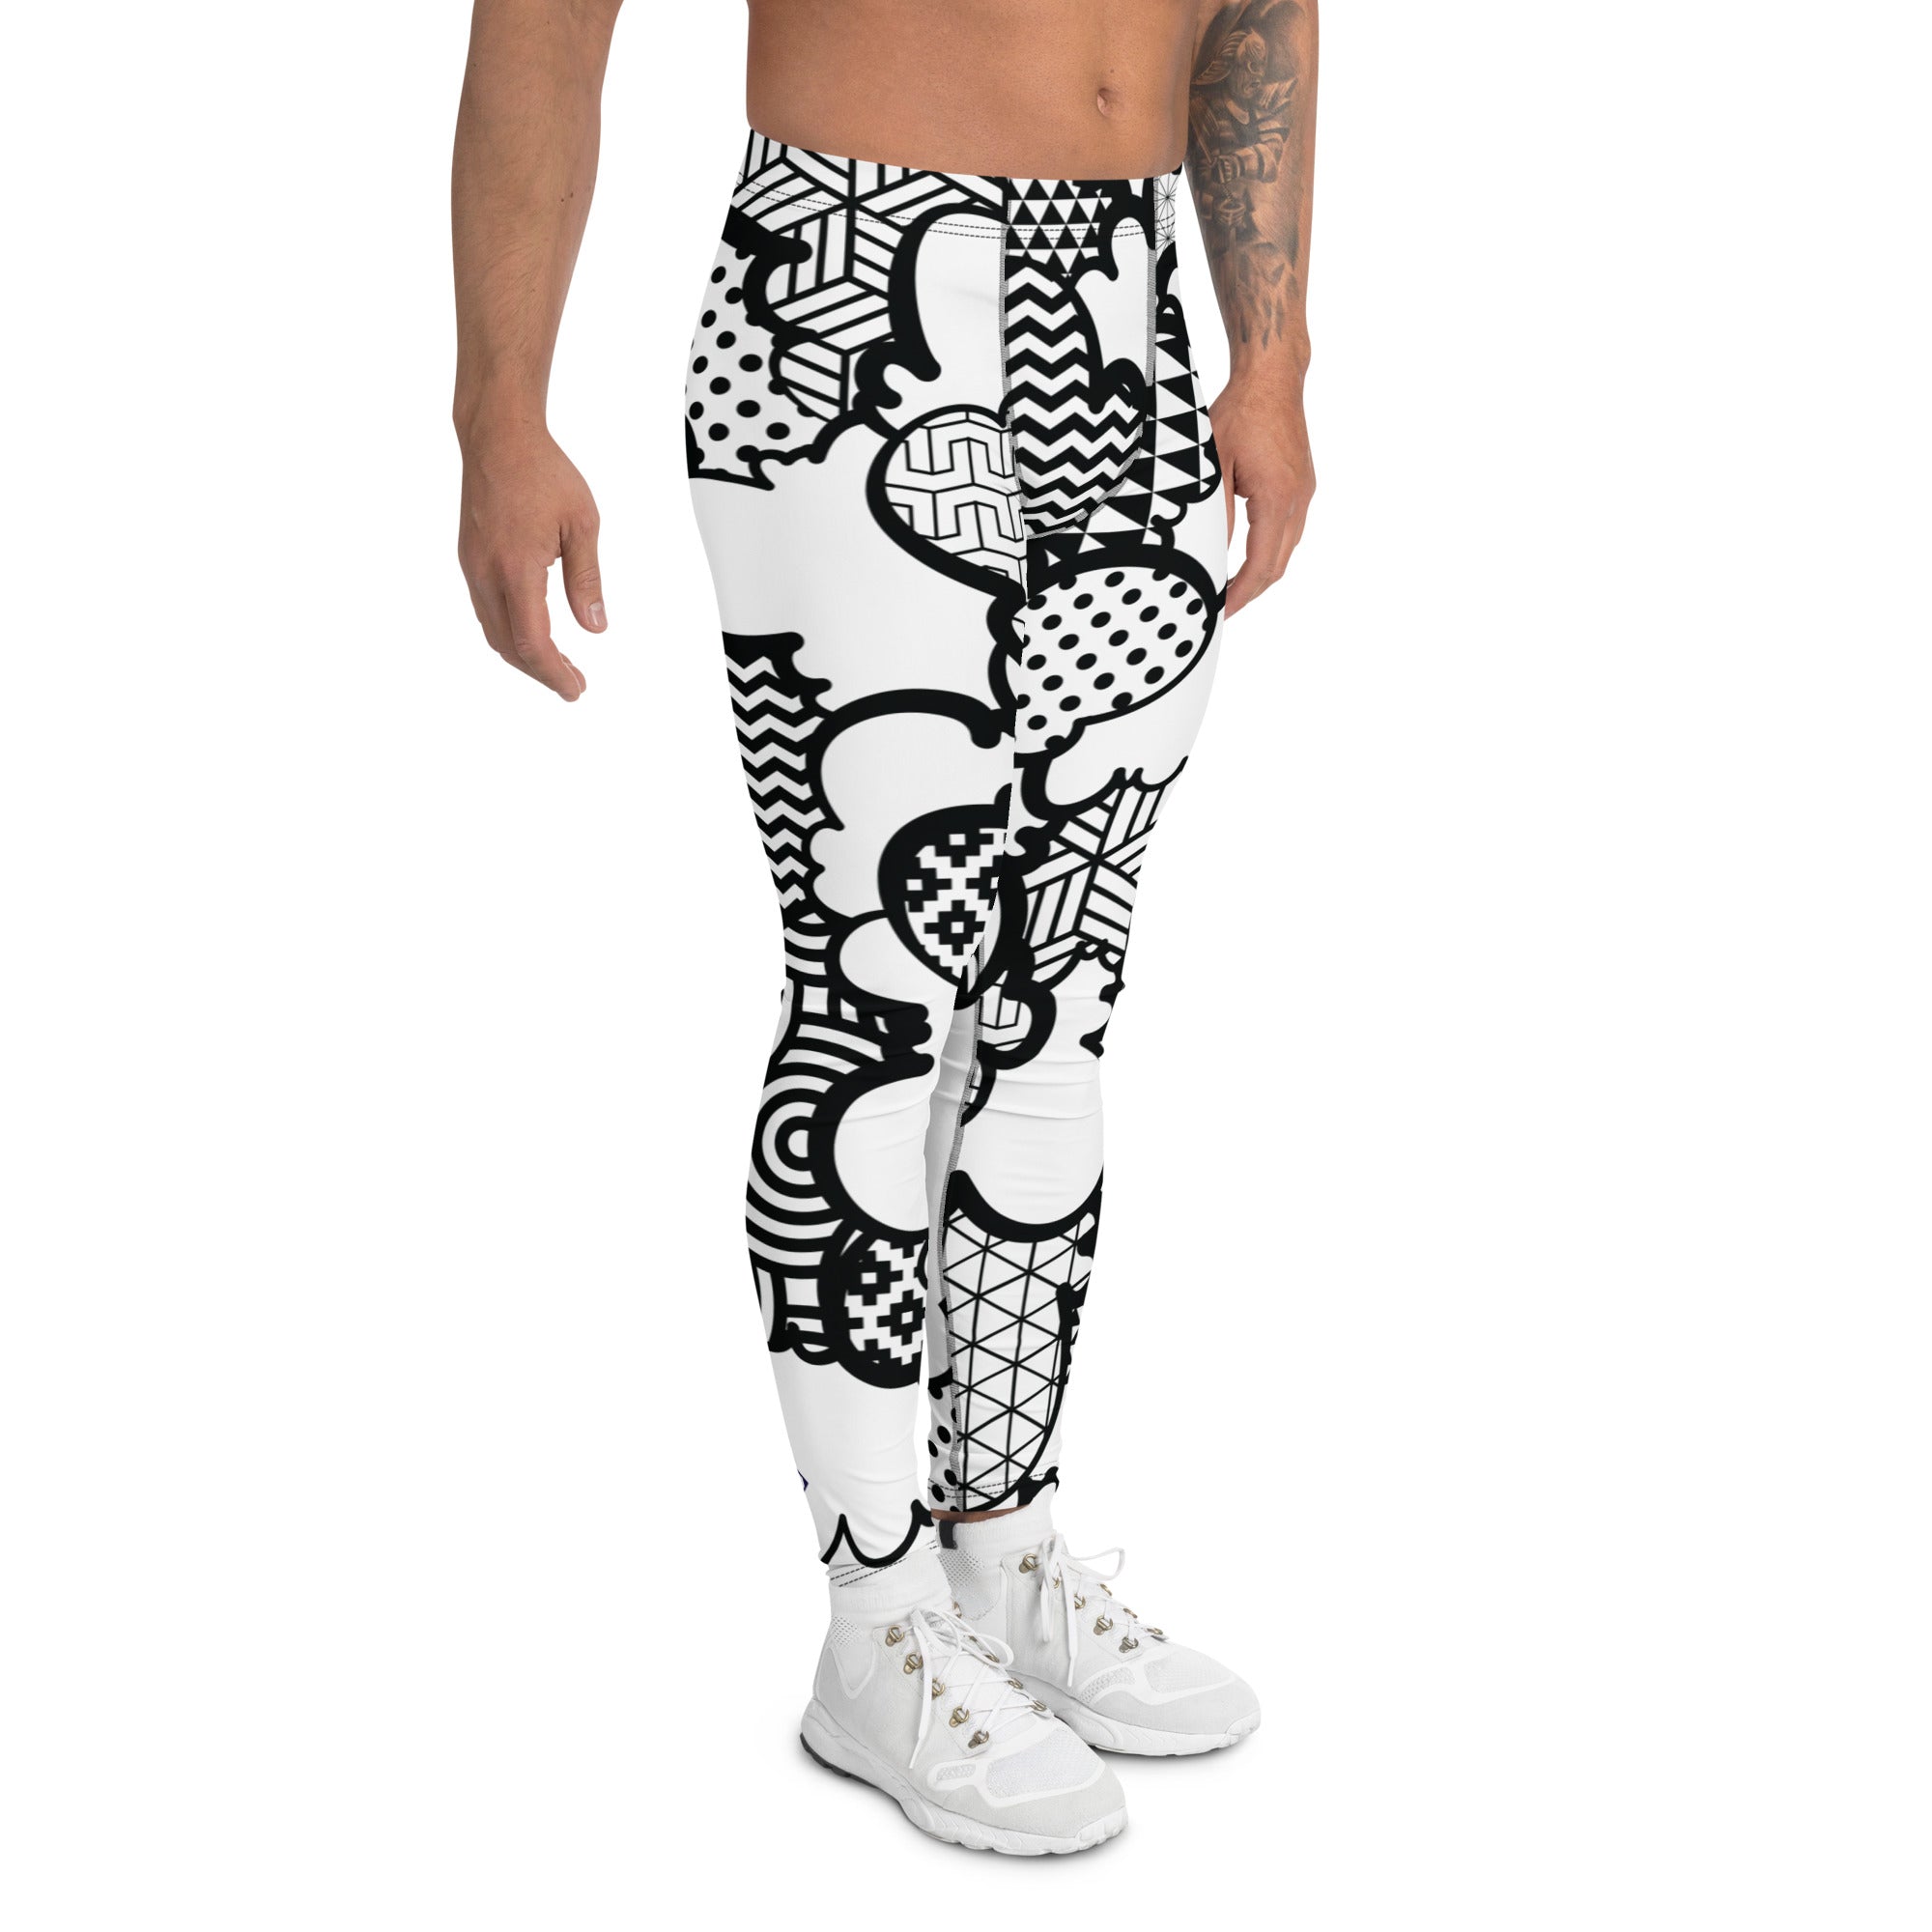 skyld udtrykkeligt Låne Men's Black and White Graffiti Clouds Pattern Athletic Leggings for Ru –  Soldier Complex